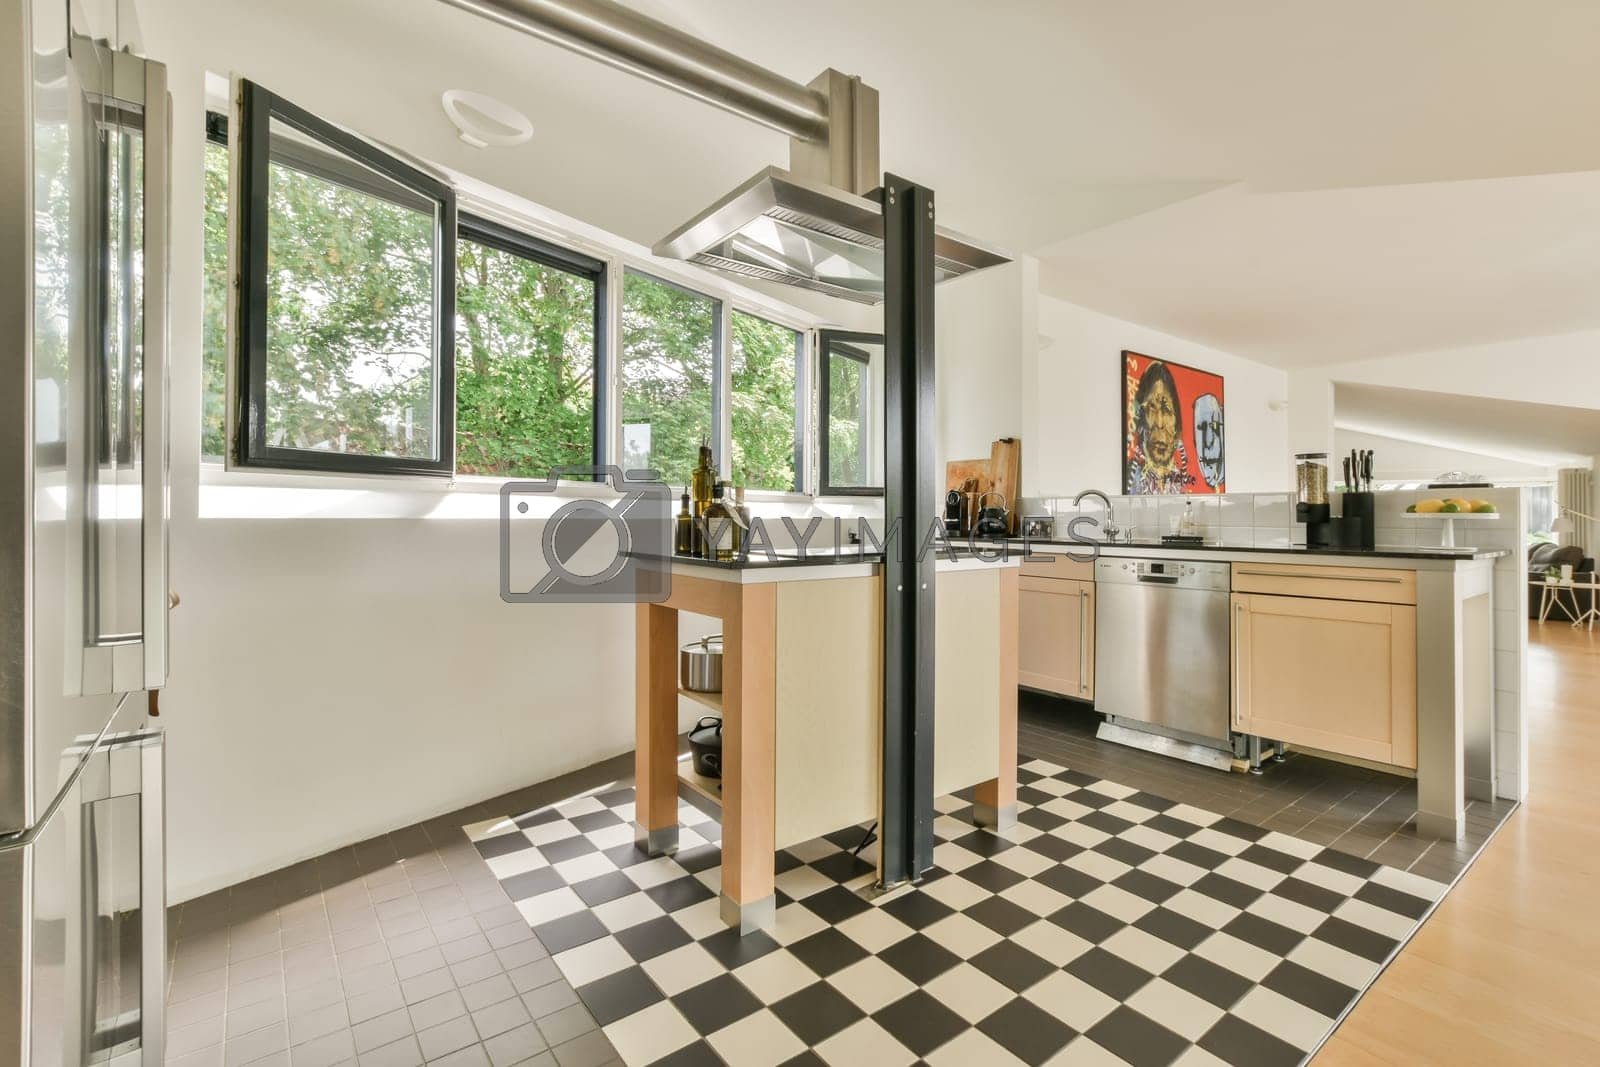 Royalty free image of a kitchen with checkered floors and a window by casamedia